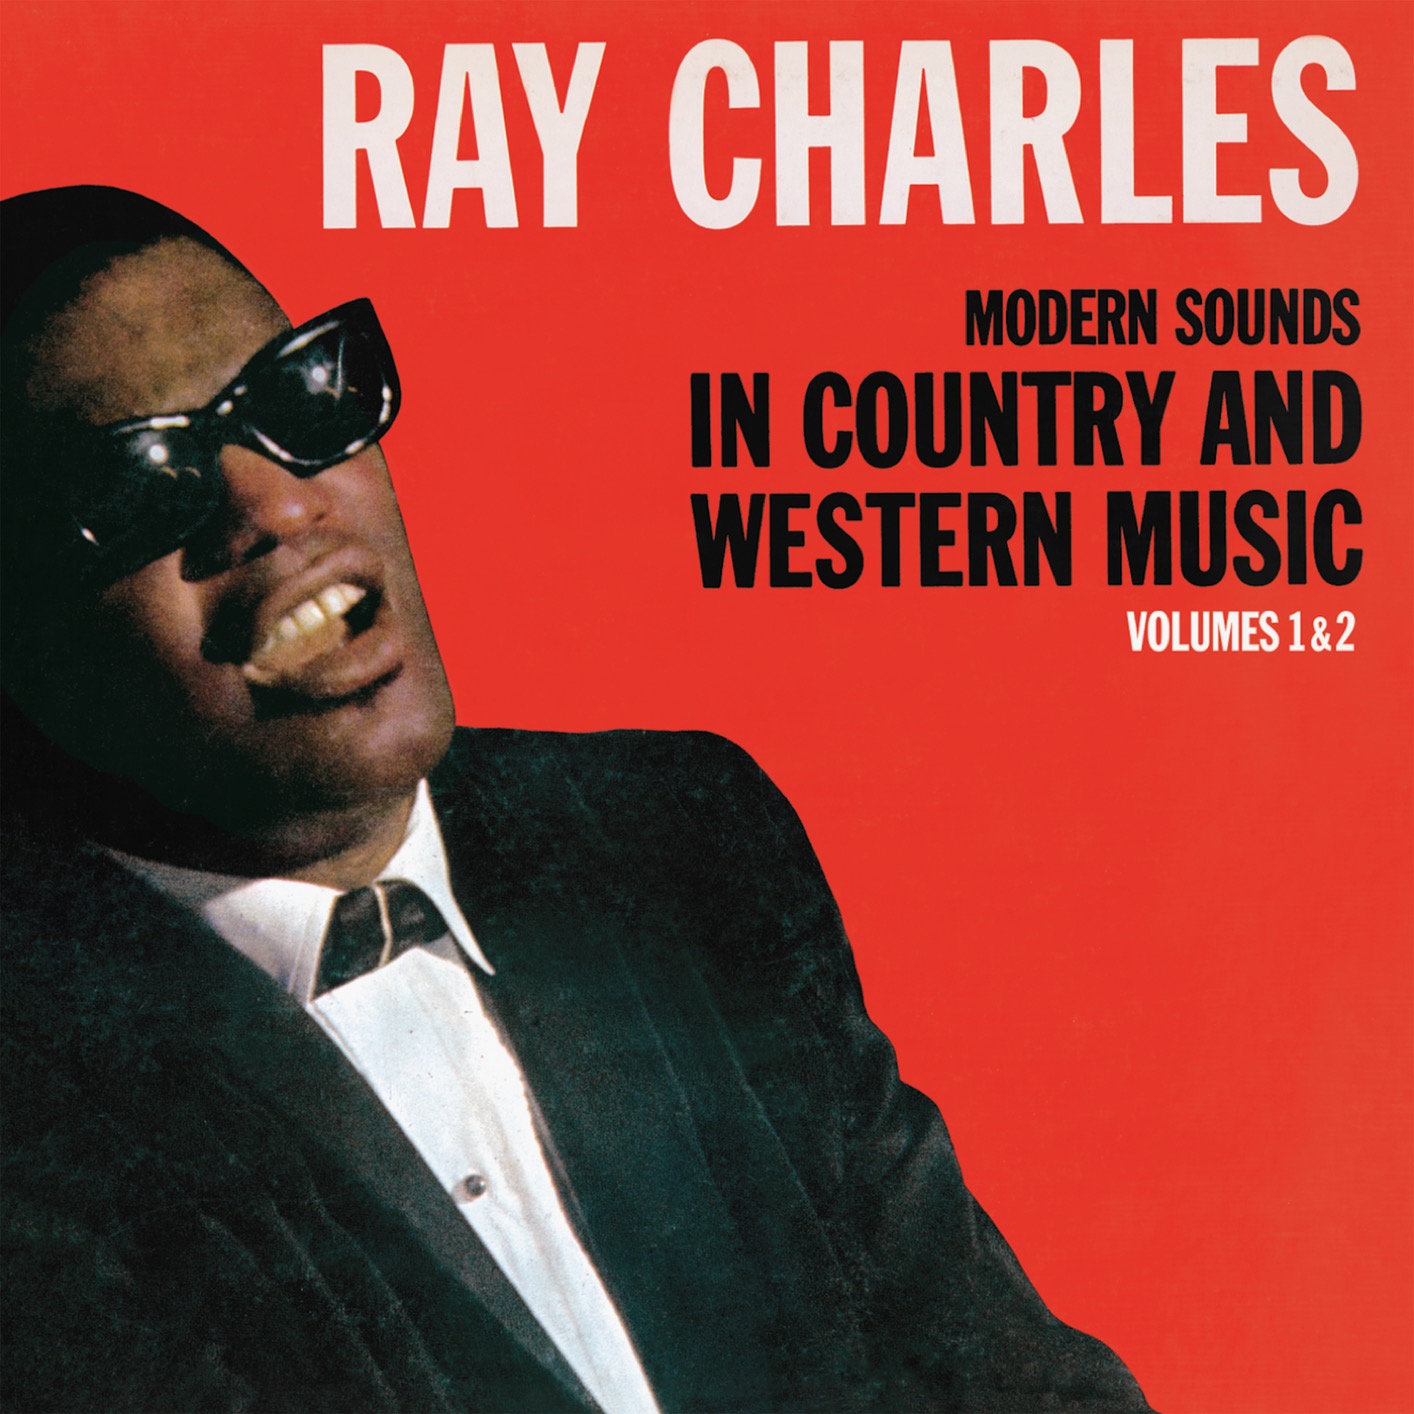 Ray Charles – Modern Sounds In Country And Western Music, Vols 1 & 2 (Remastered) (2009/2019) [FLAC 24bit/96kHz]